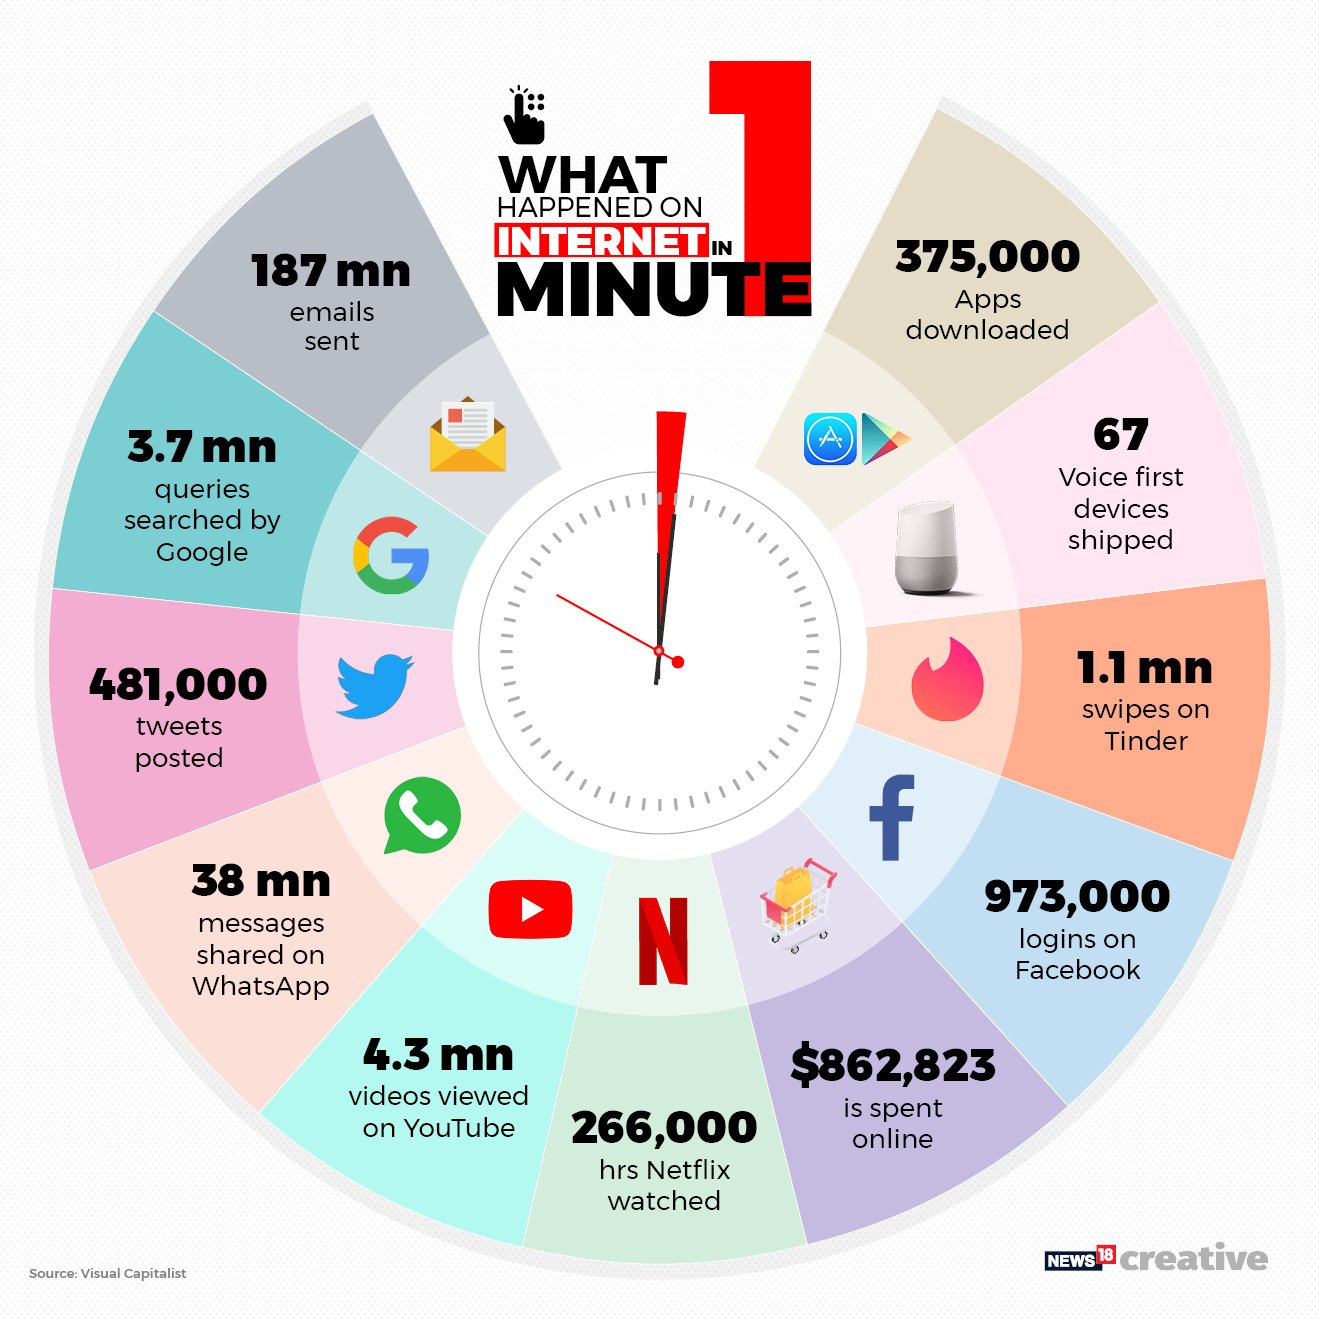 Infographic: What Happens in an Internet Minute in 2019?